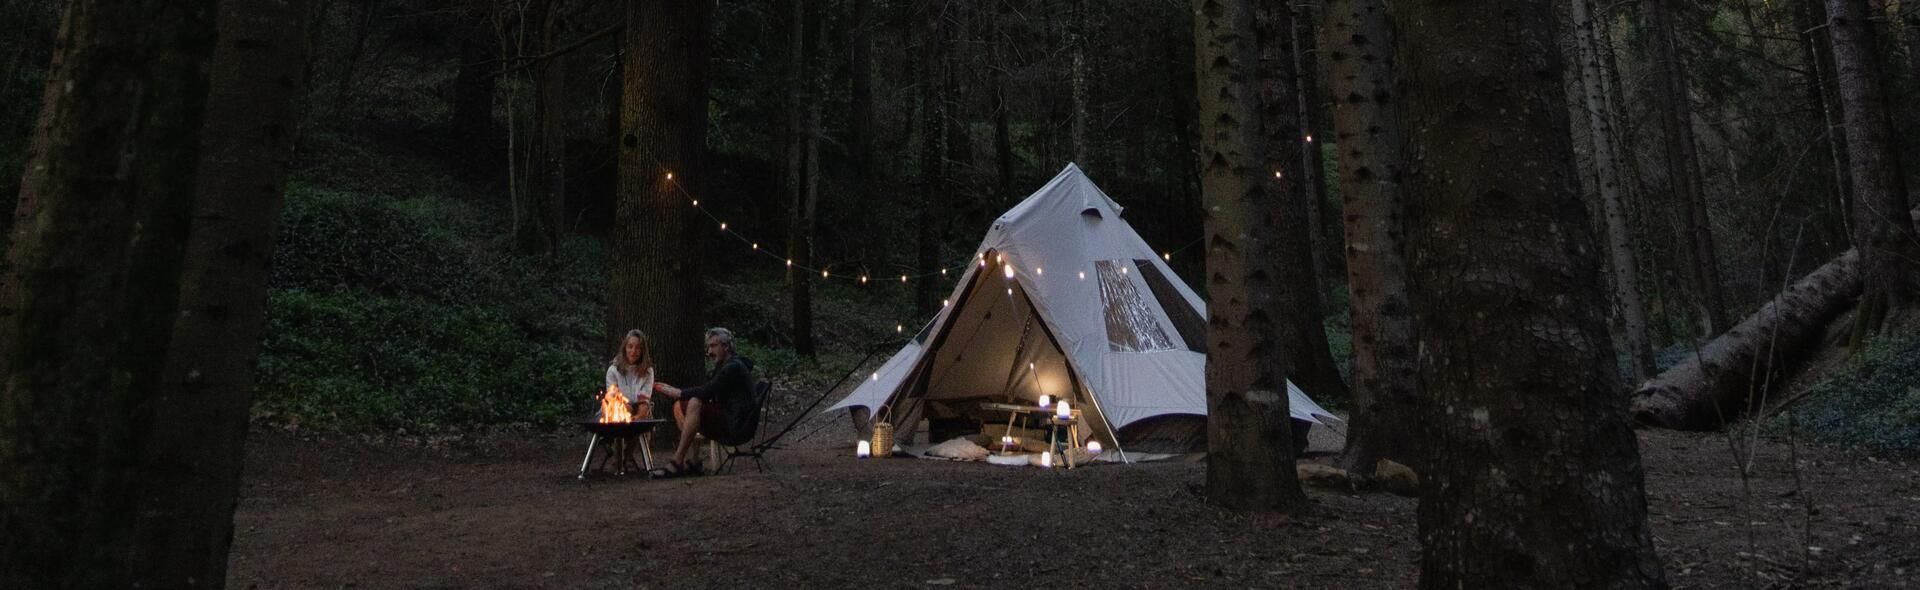 Glamping vs. camping: what is what and where is the difference?